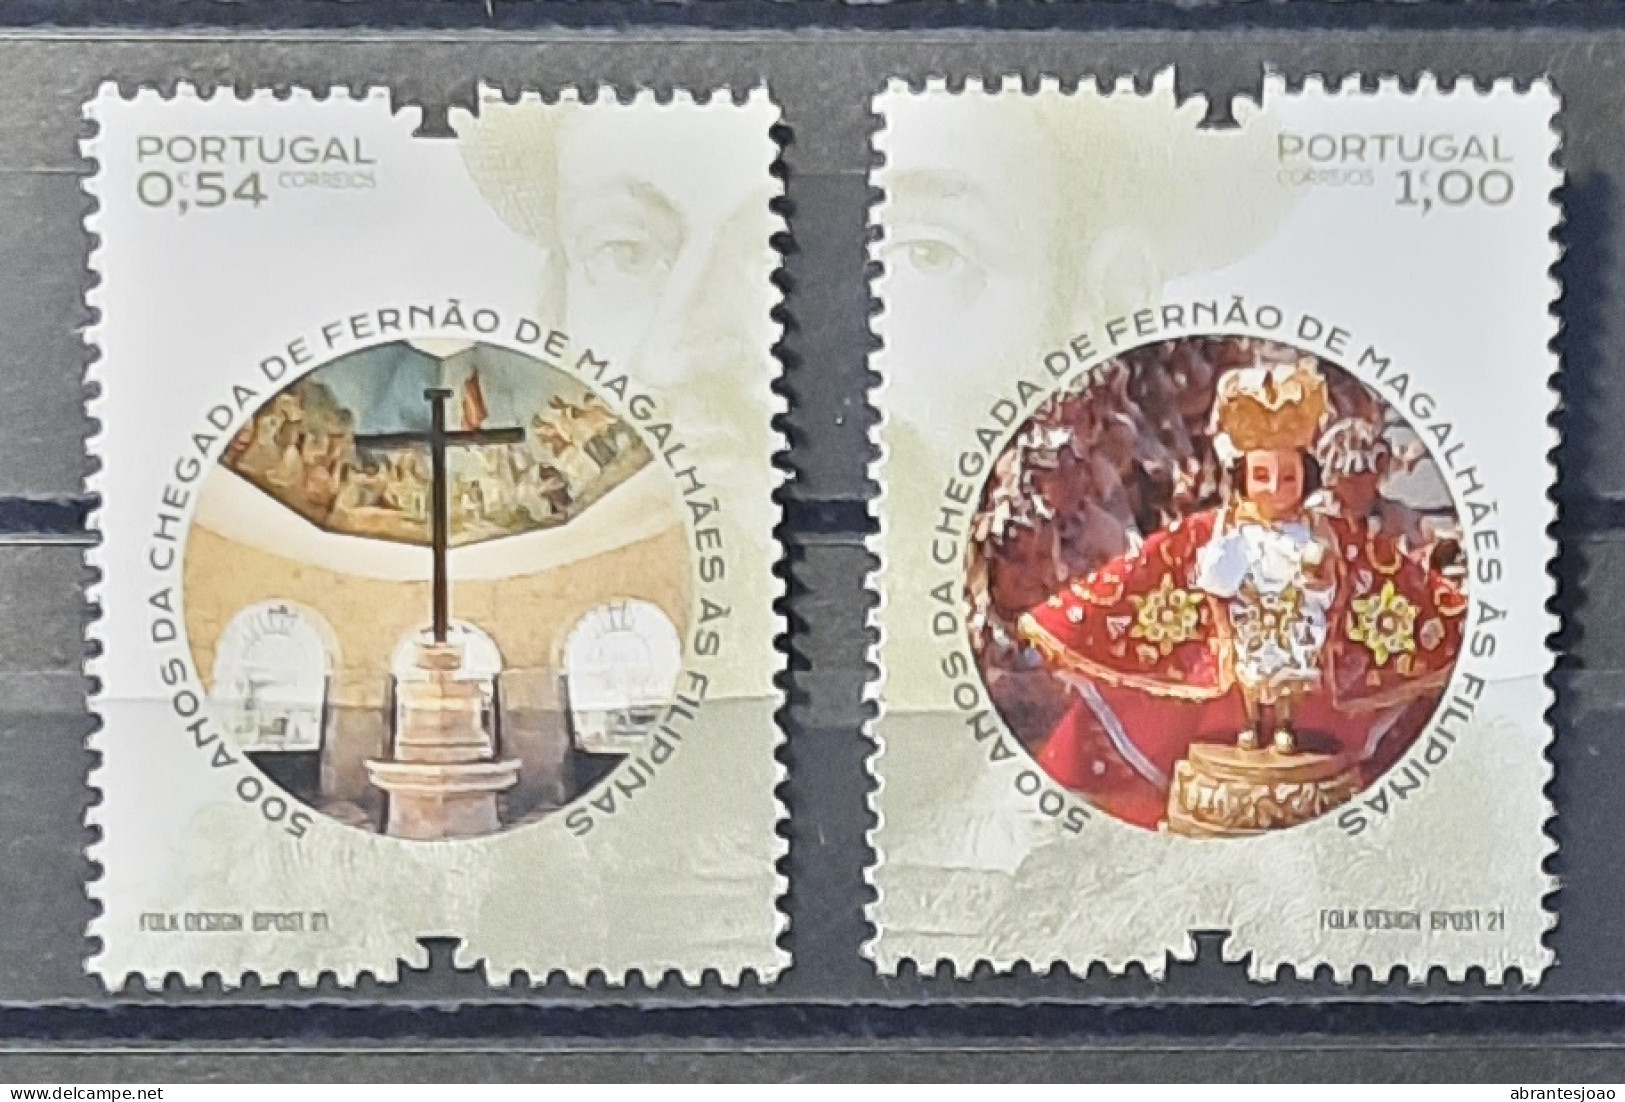 2021 - Portugal - MNH - 500 Years Since The Arrival Of Ferdinand Magellan To Philippines - 2 Stamps - Unused Stamps